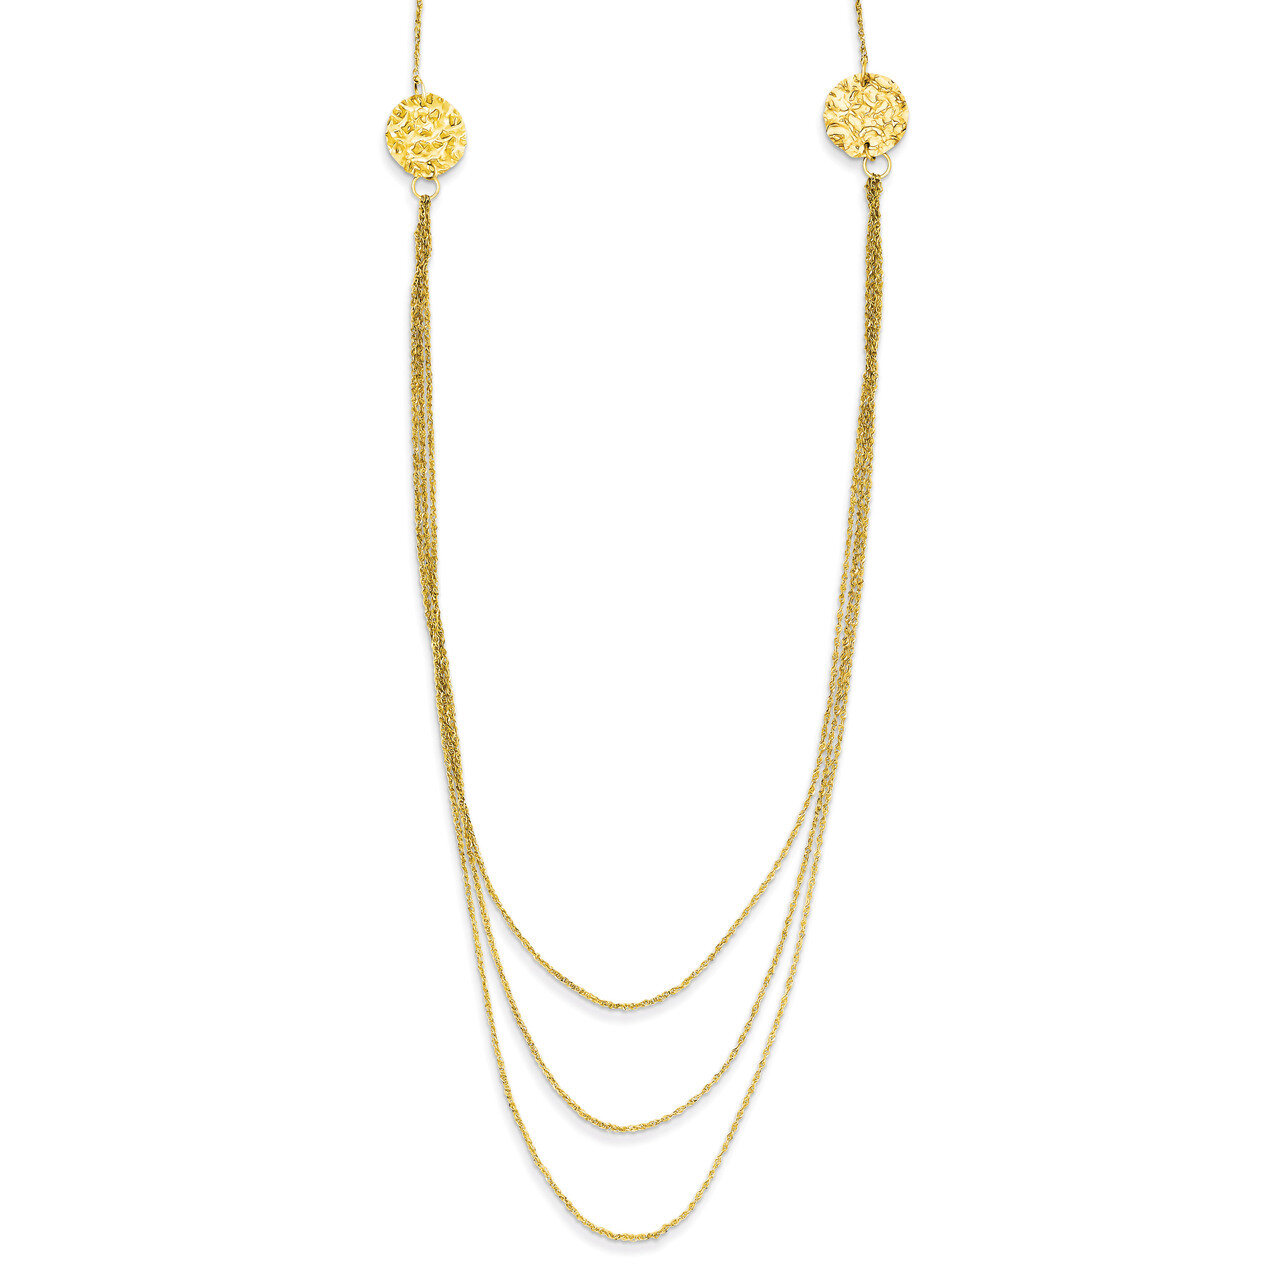 3 Layer Ropa Chain Texture Side Circles with 2in Ext Necklace 16 Inch 14k Gold SF2013-16